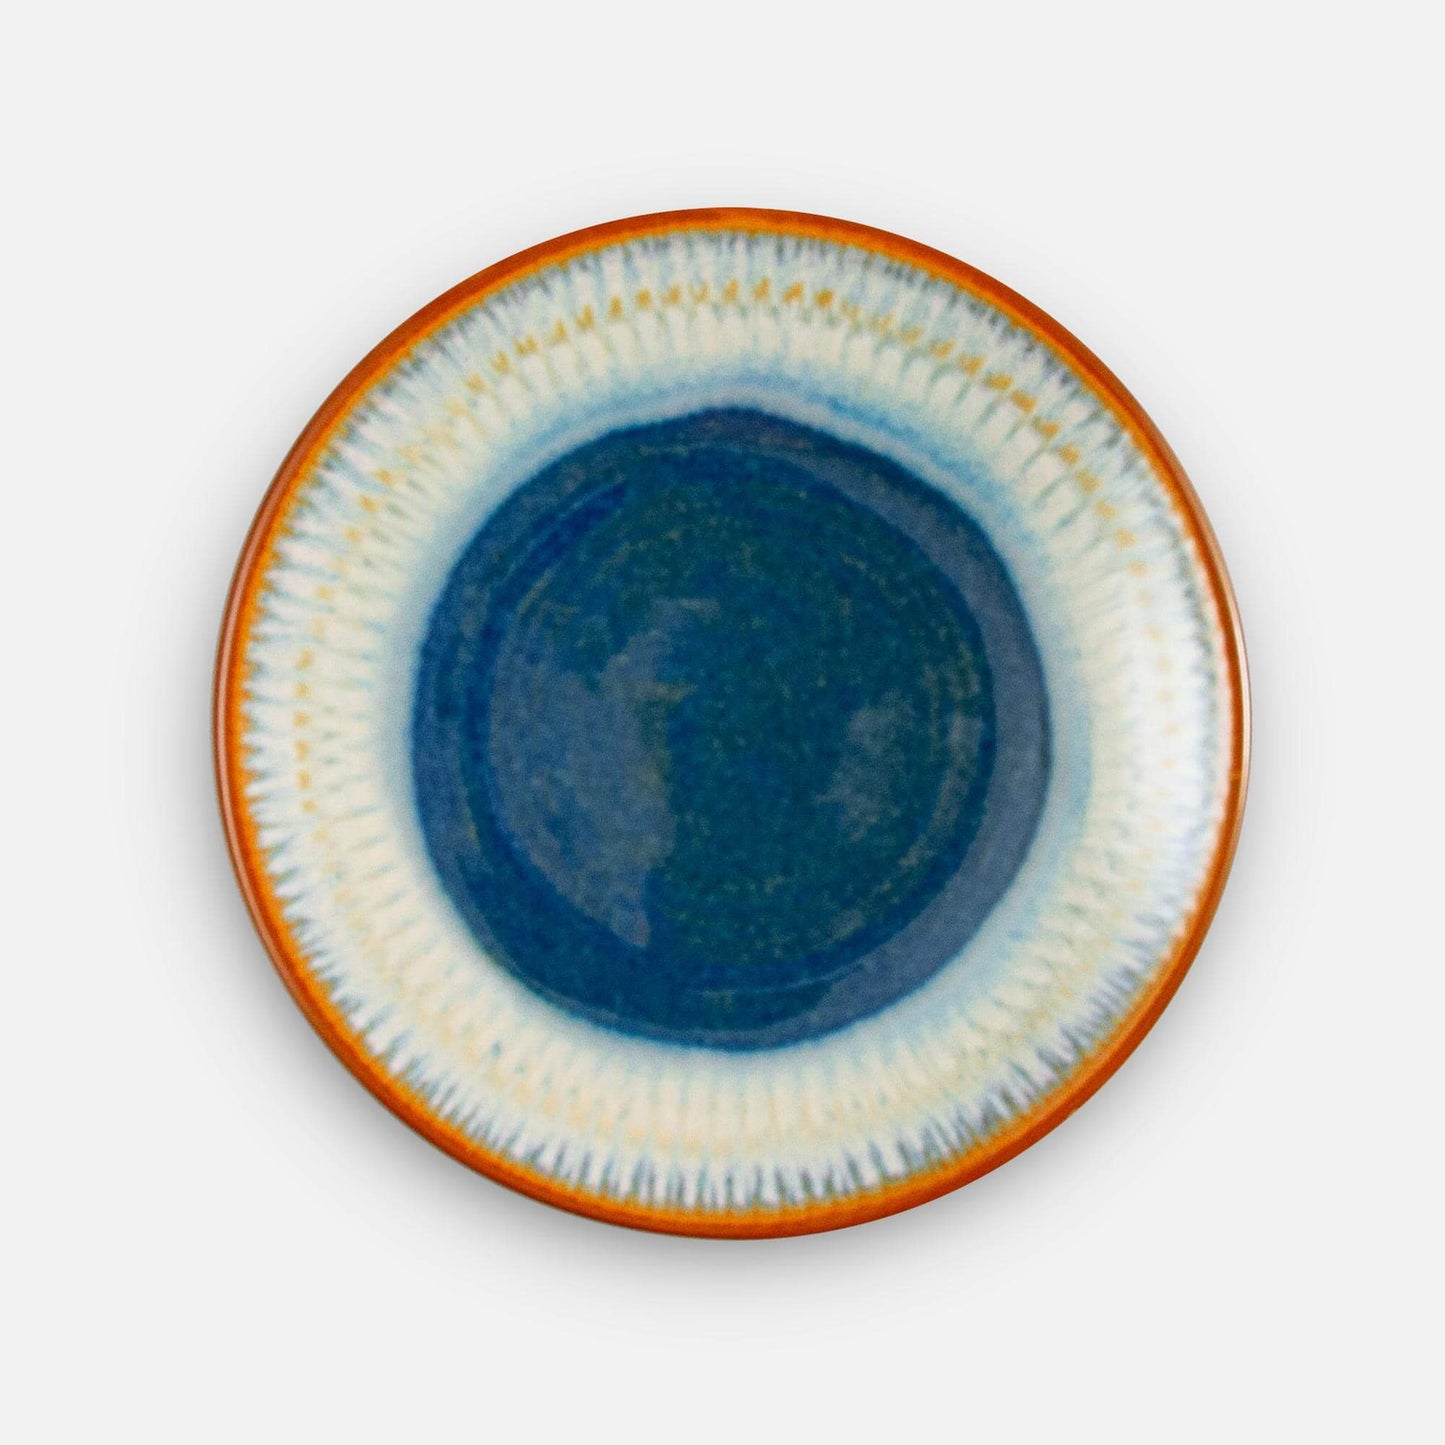 Handmade Pottery Footed Dessert Plate in Cobalt pattern made by Georgetown Pottery in Maine